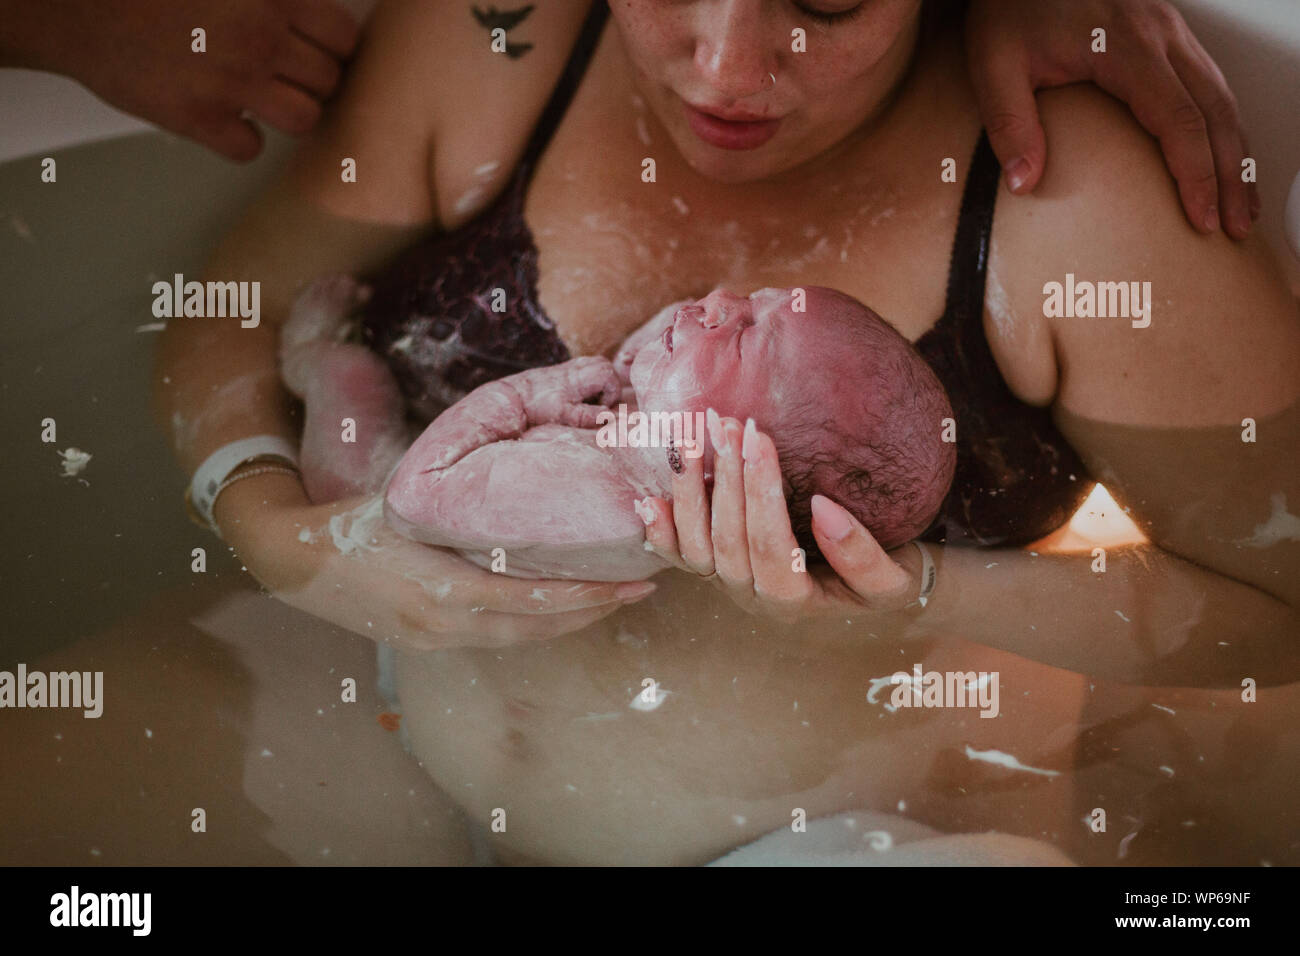 Authentic birth images, woman giving birth in pool Stock Photo